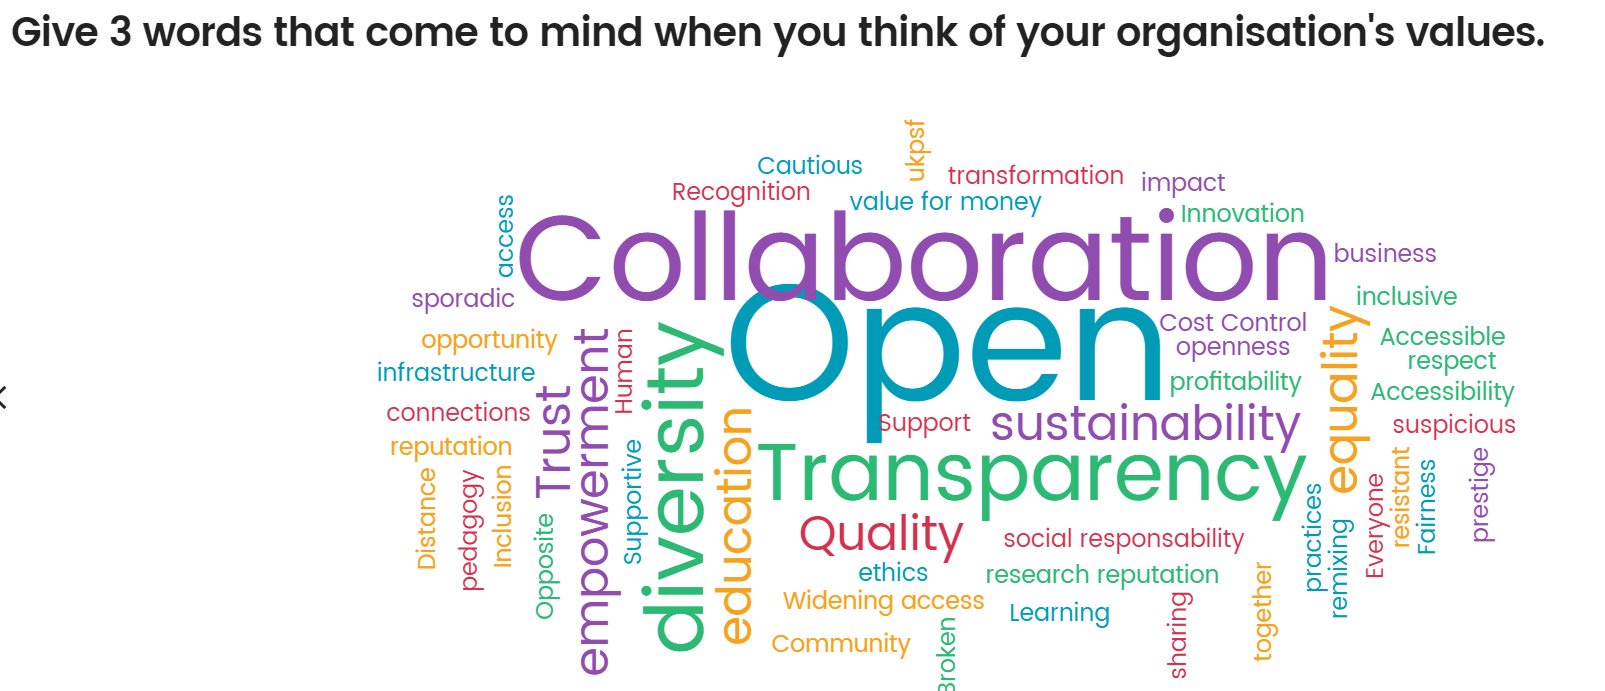 here's a snapshot from our final #openedsig #values poll , lots to talk about here! #oer #oep https://t.co/hHVsBAxmnr